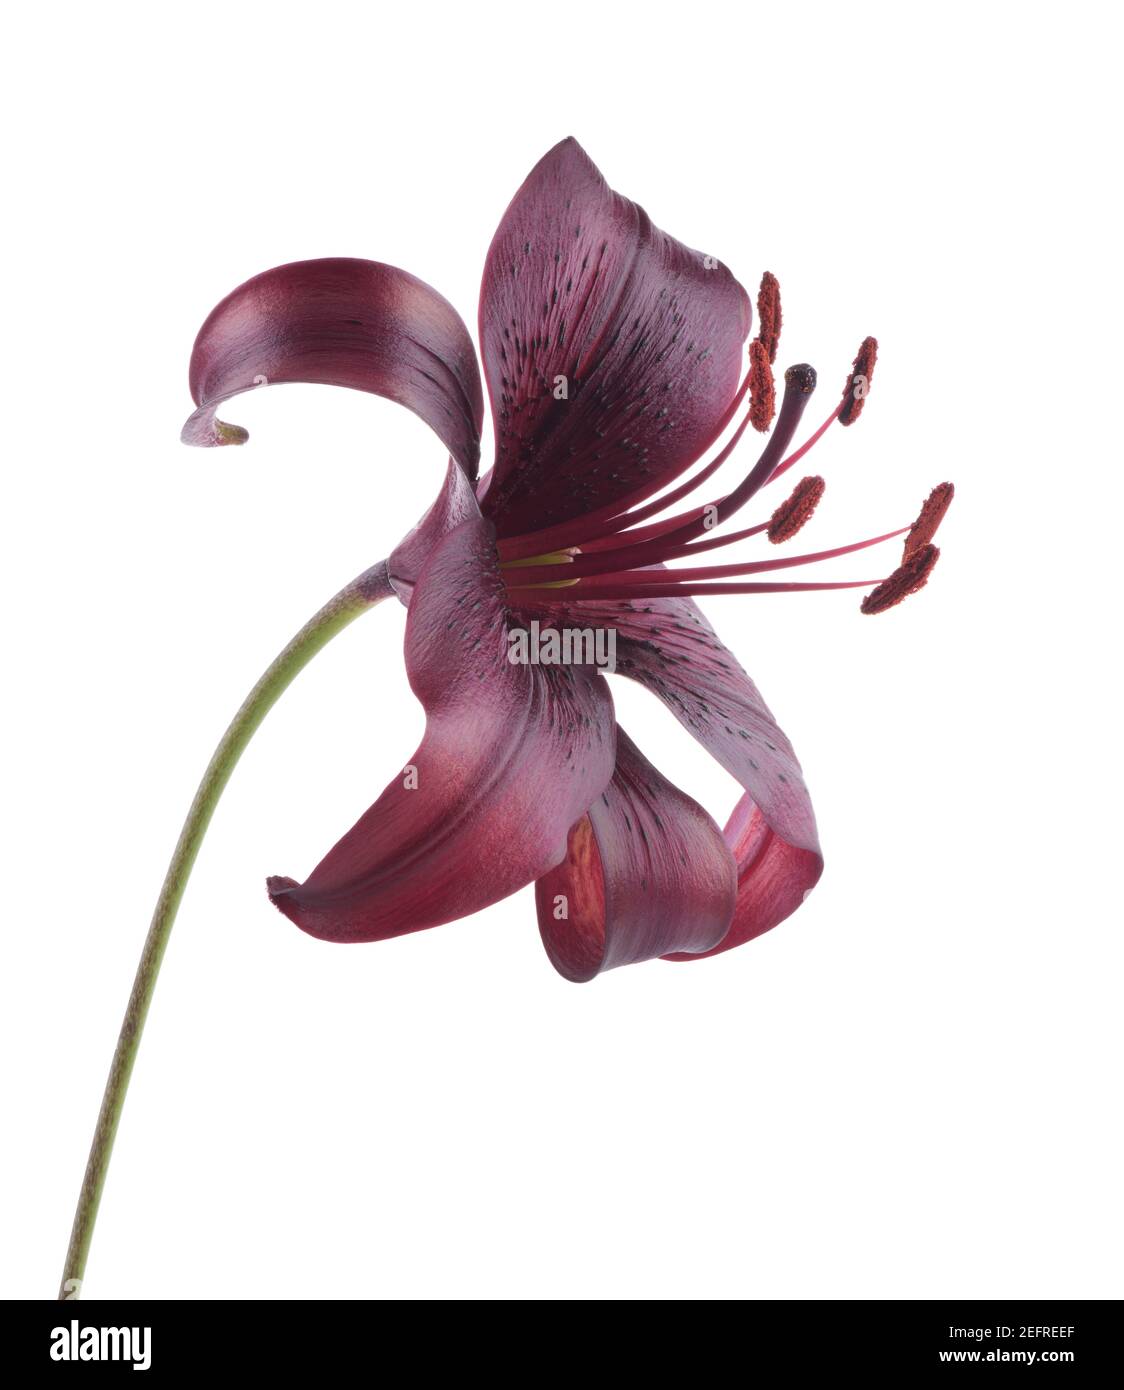 Asiatic Lily Midnight Mystery, maroon, dark red flower side view. Artistic close-up isolated on white studio background. Stock Photo